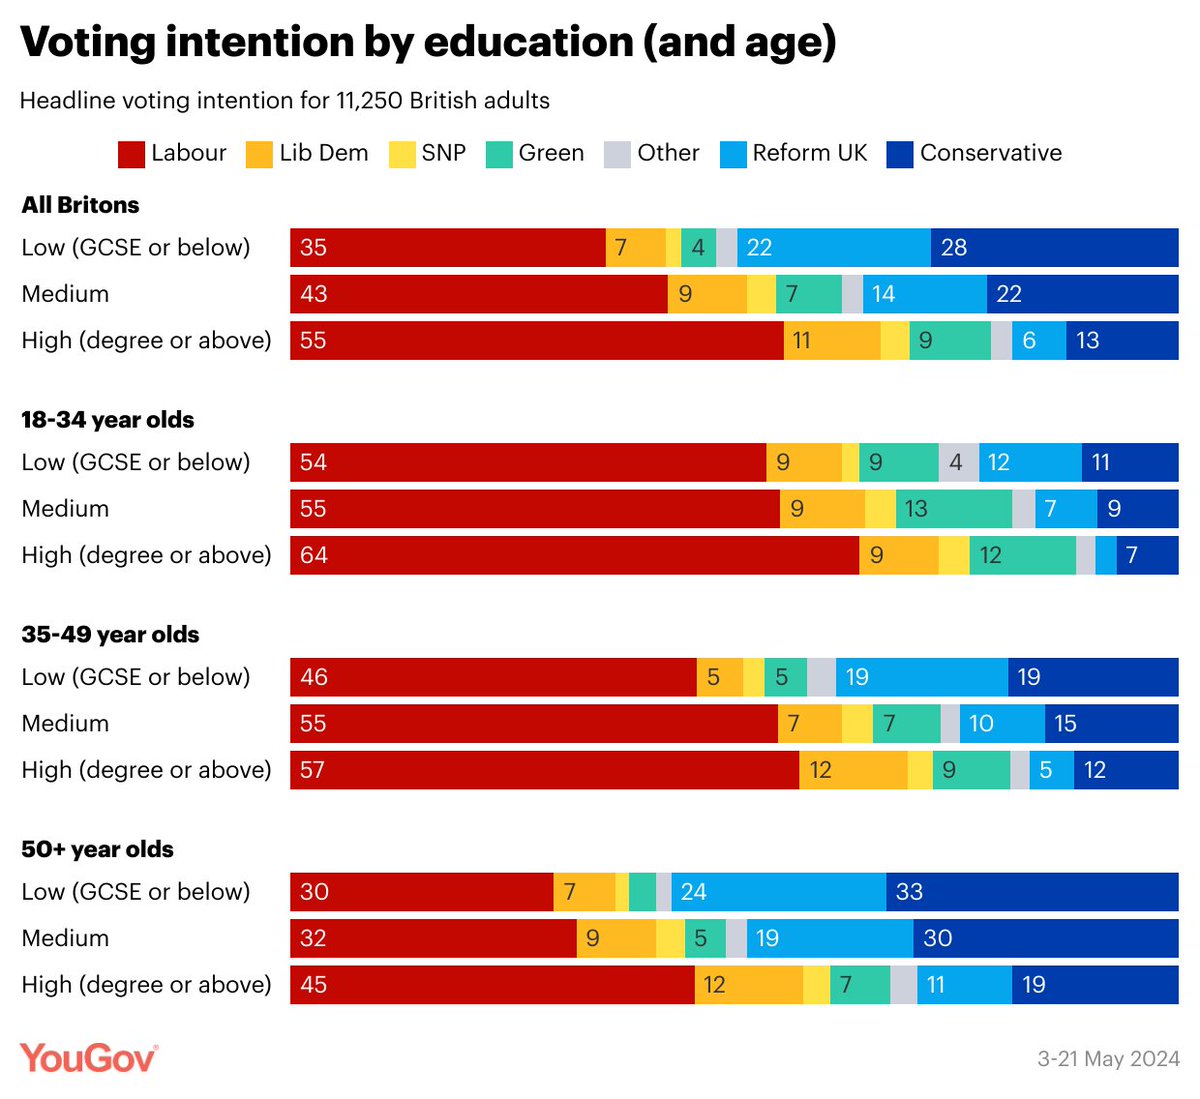 Education level is also a key factor in voting intention – those with more education qualifications are more likely they are to vote Labour/a left wing party Low (GCSE or below): 35% Lab / 28% Con (+22% Ref UK) Medium: 43% Lab / 22% Con High (degree or above): 55% Lab / 13% Con